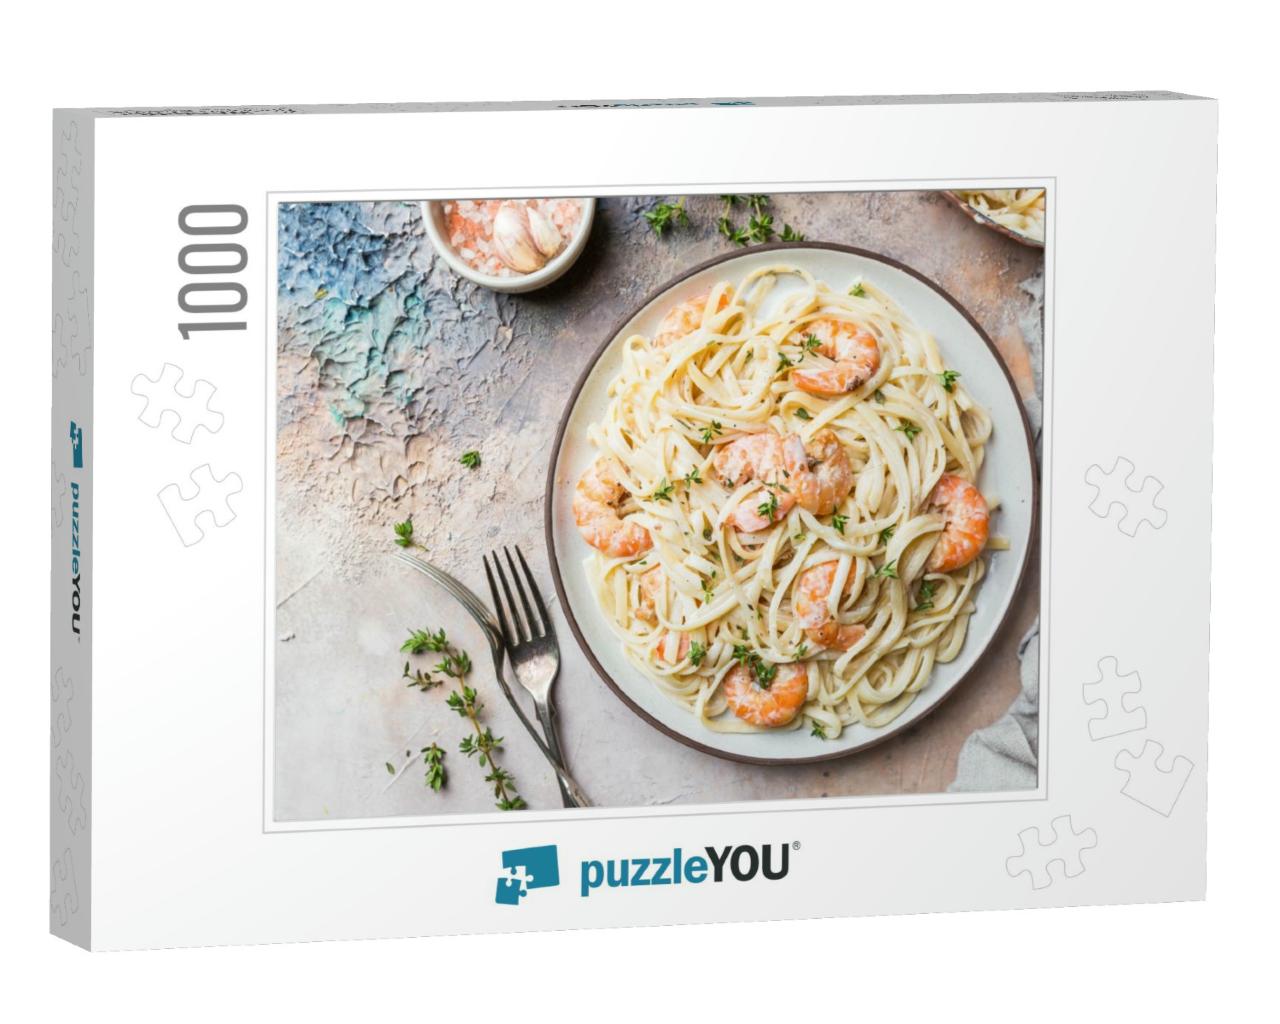 Italian Pasta Fettuccine in a Creamy Sauce with Shrimp on... Jigsaw Puzzle with 1000 pieces